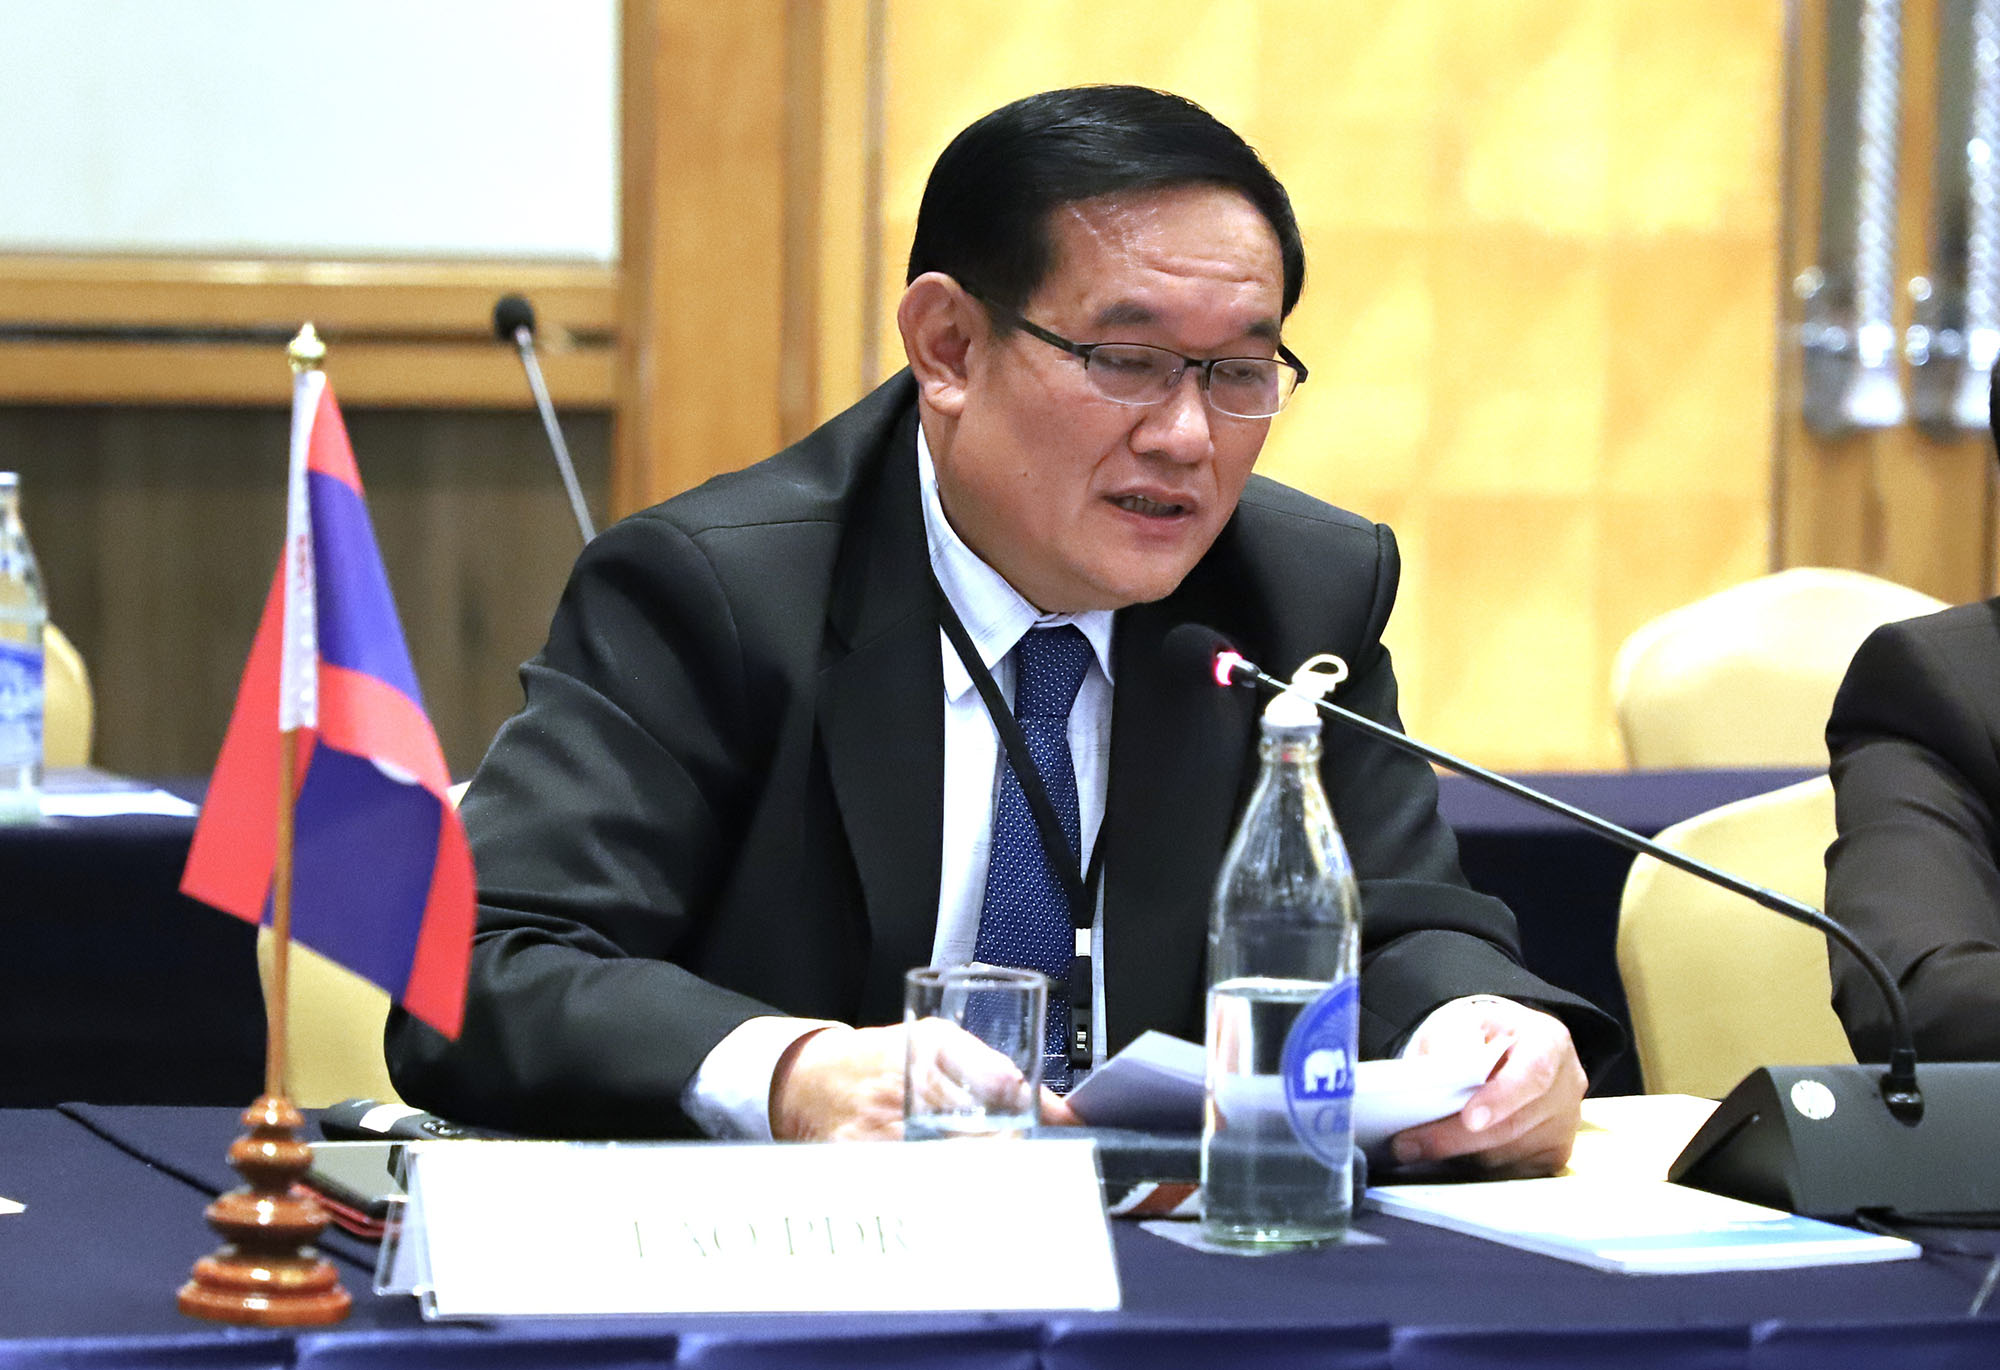 Director General Lathsamee Xayyakham of the Ministry of Public Security of Lao PDR discusses the situation in border areas, the willingness to cooperate on joint operations, and the need for capacity building.